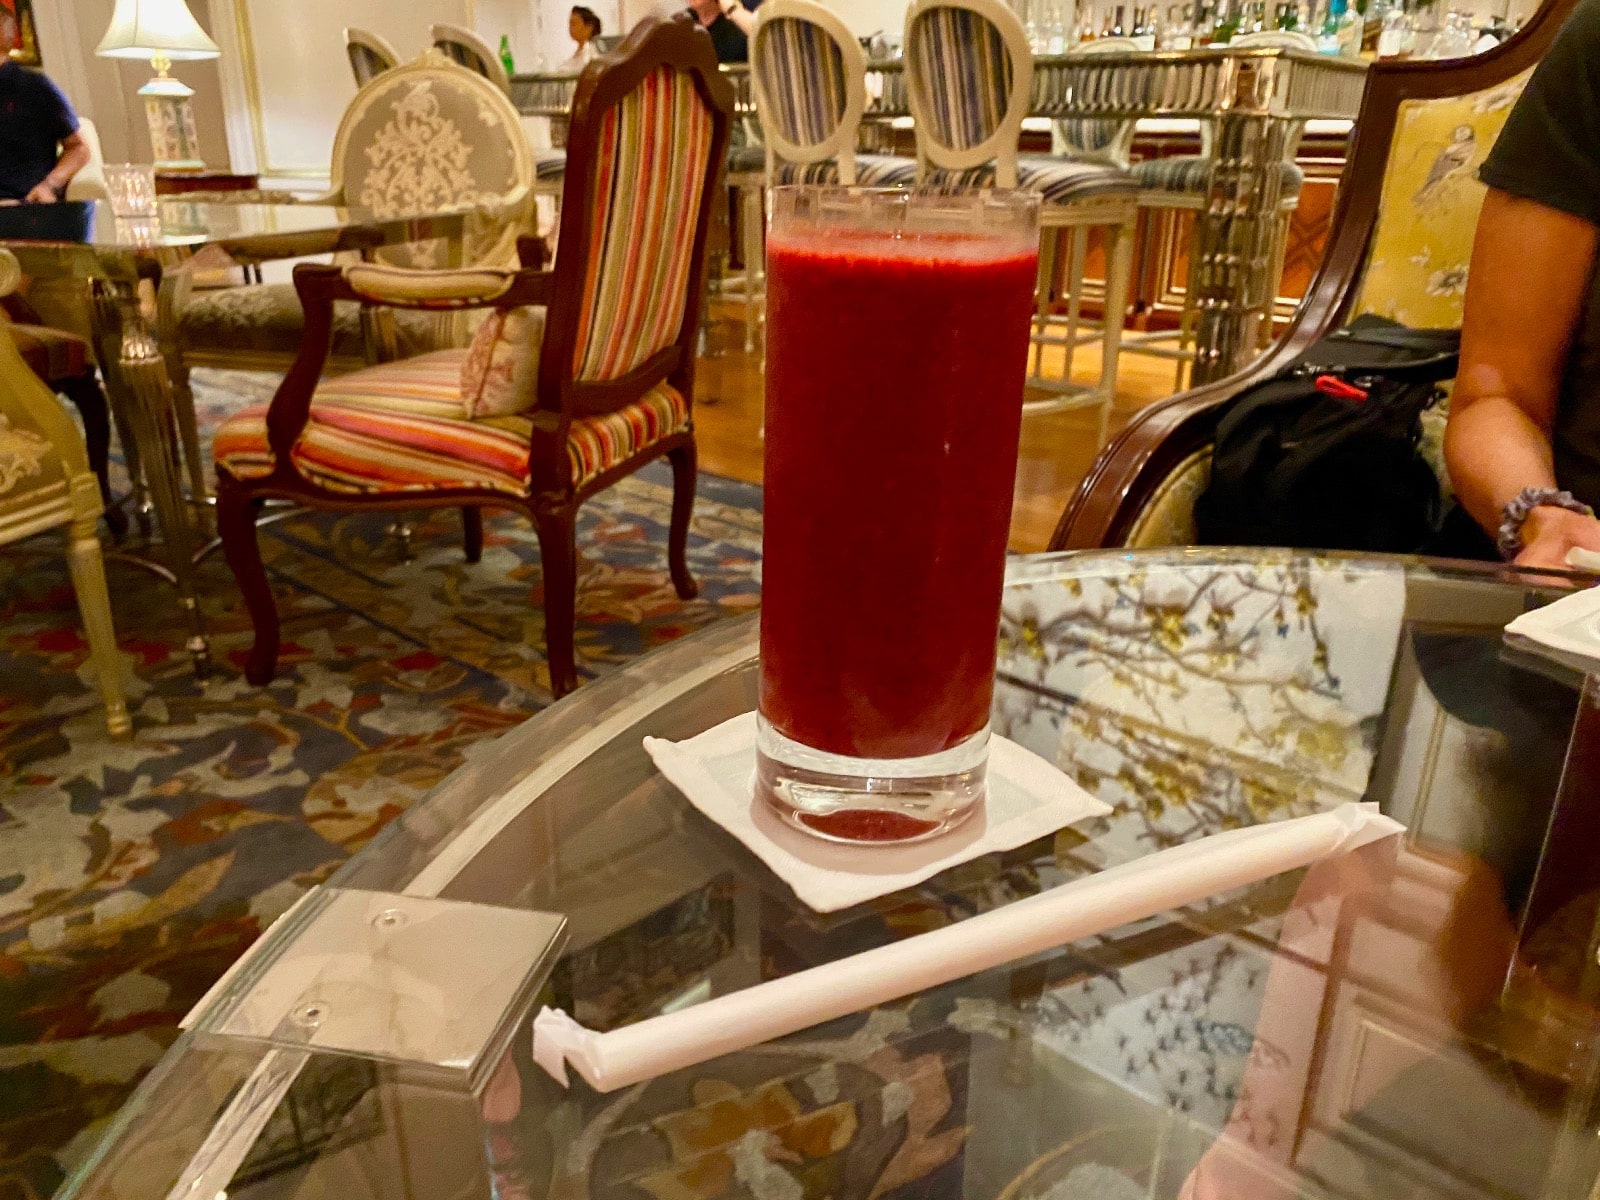 a glass with a red liquid on a table